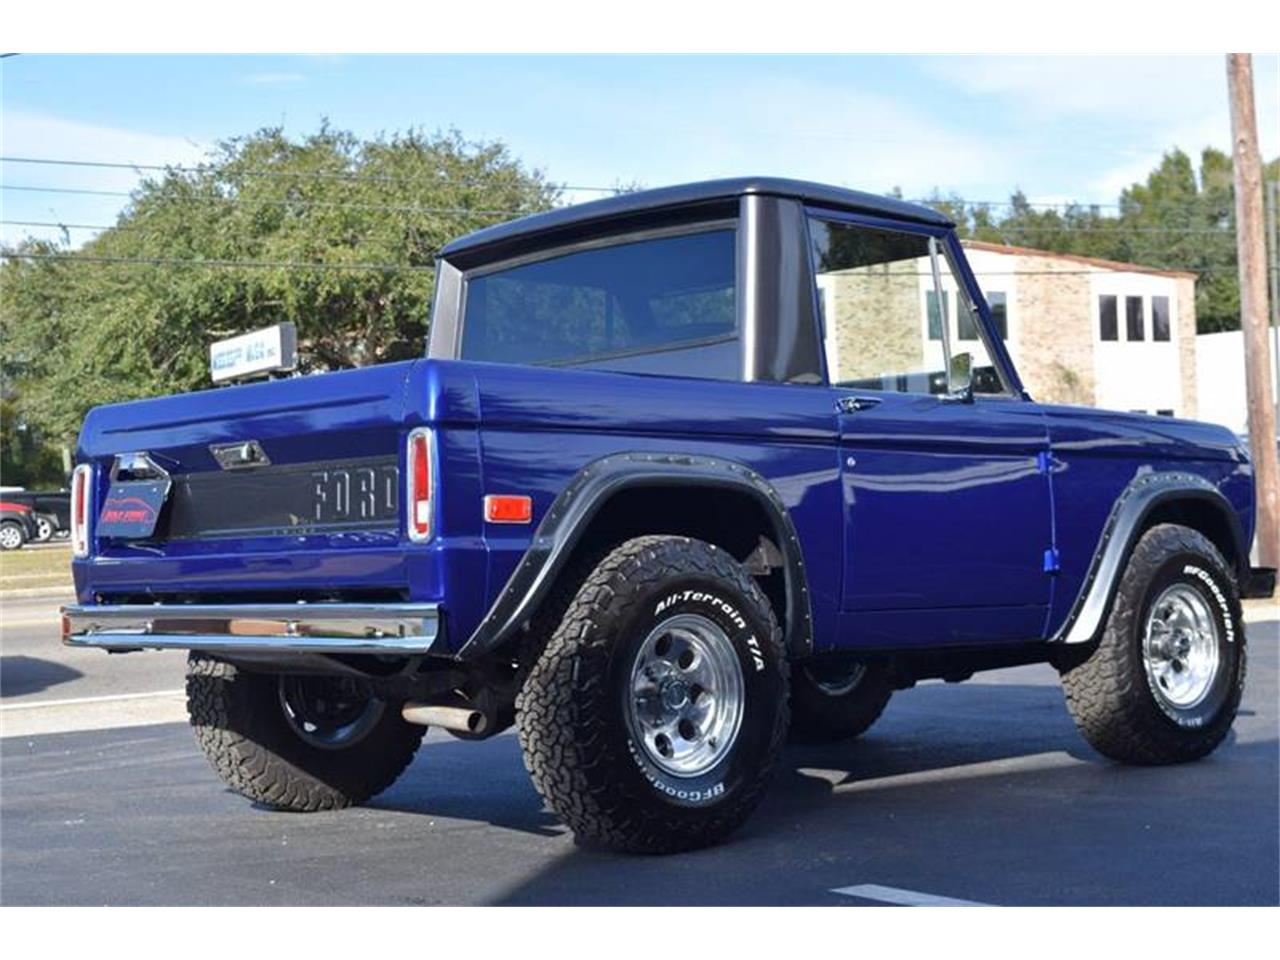 1972 Ford Bronco for sale in Biloxi, MS / classiccarsbay.com